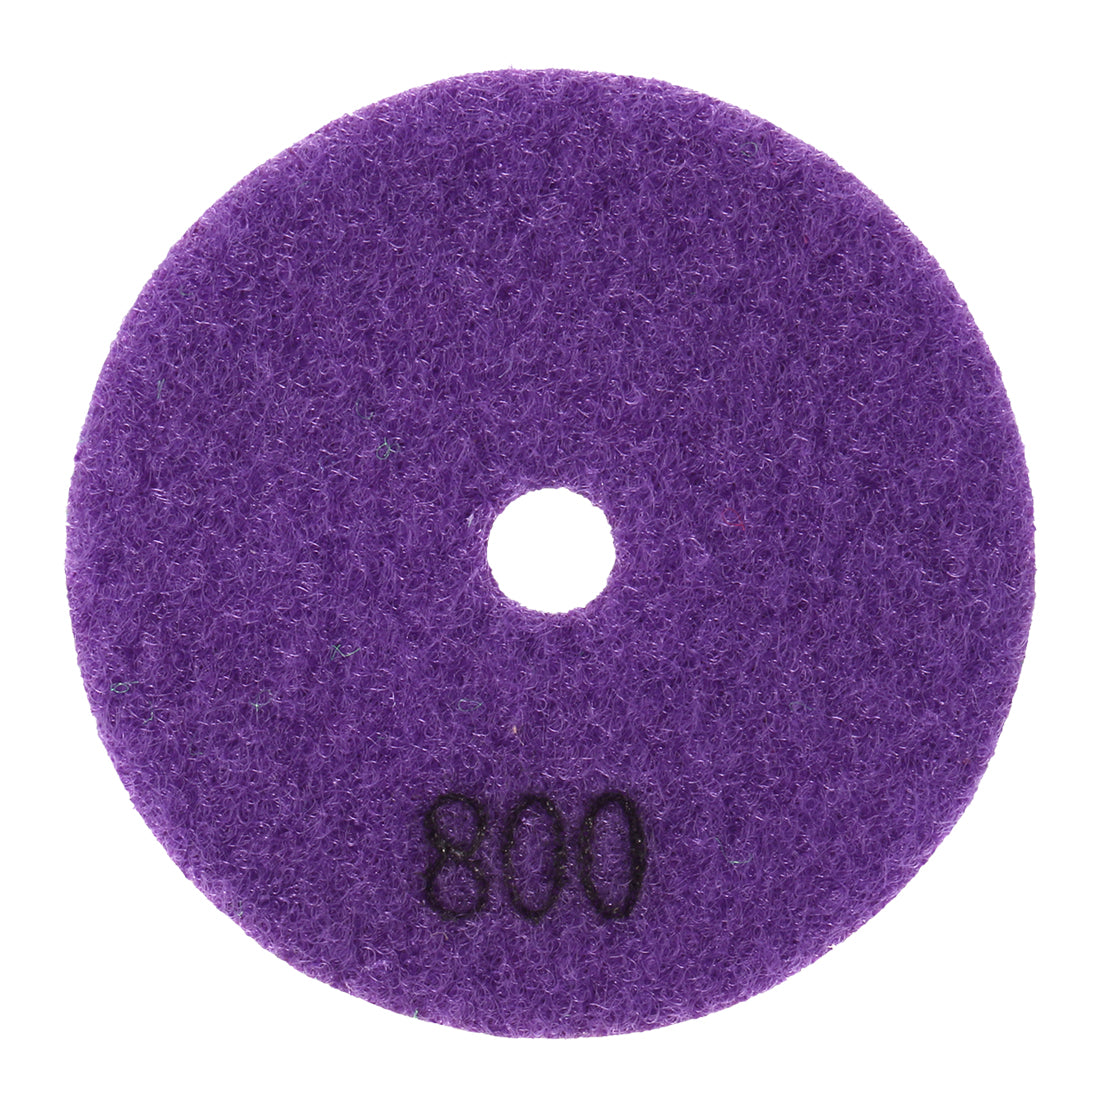 uxcell Uxcell 3-inch Diamond Wet Polishing Pad Grit 800 10pcs for Granite Concrete Marble